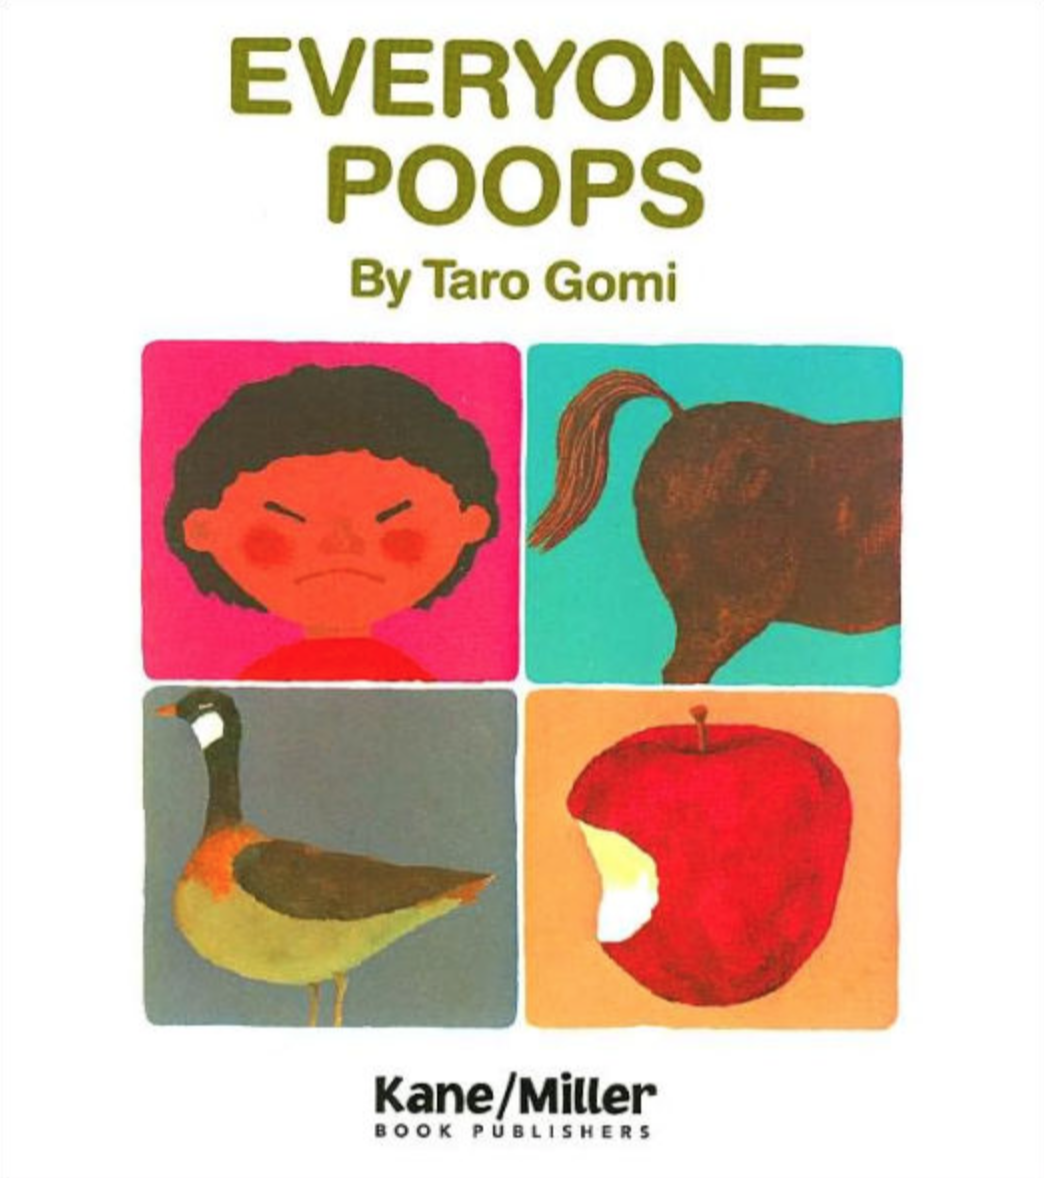 Cover image for Everyone Poops featuring four illustrations arranged in a grid. One is of a child grimacing. The next is a horse's rear end in profile view. The next is a goose. The next is an apple with a bite out of it